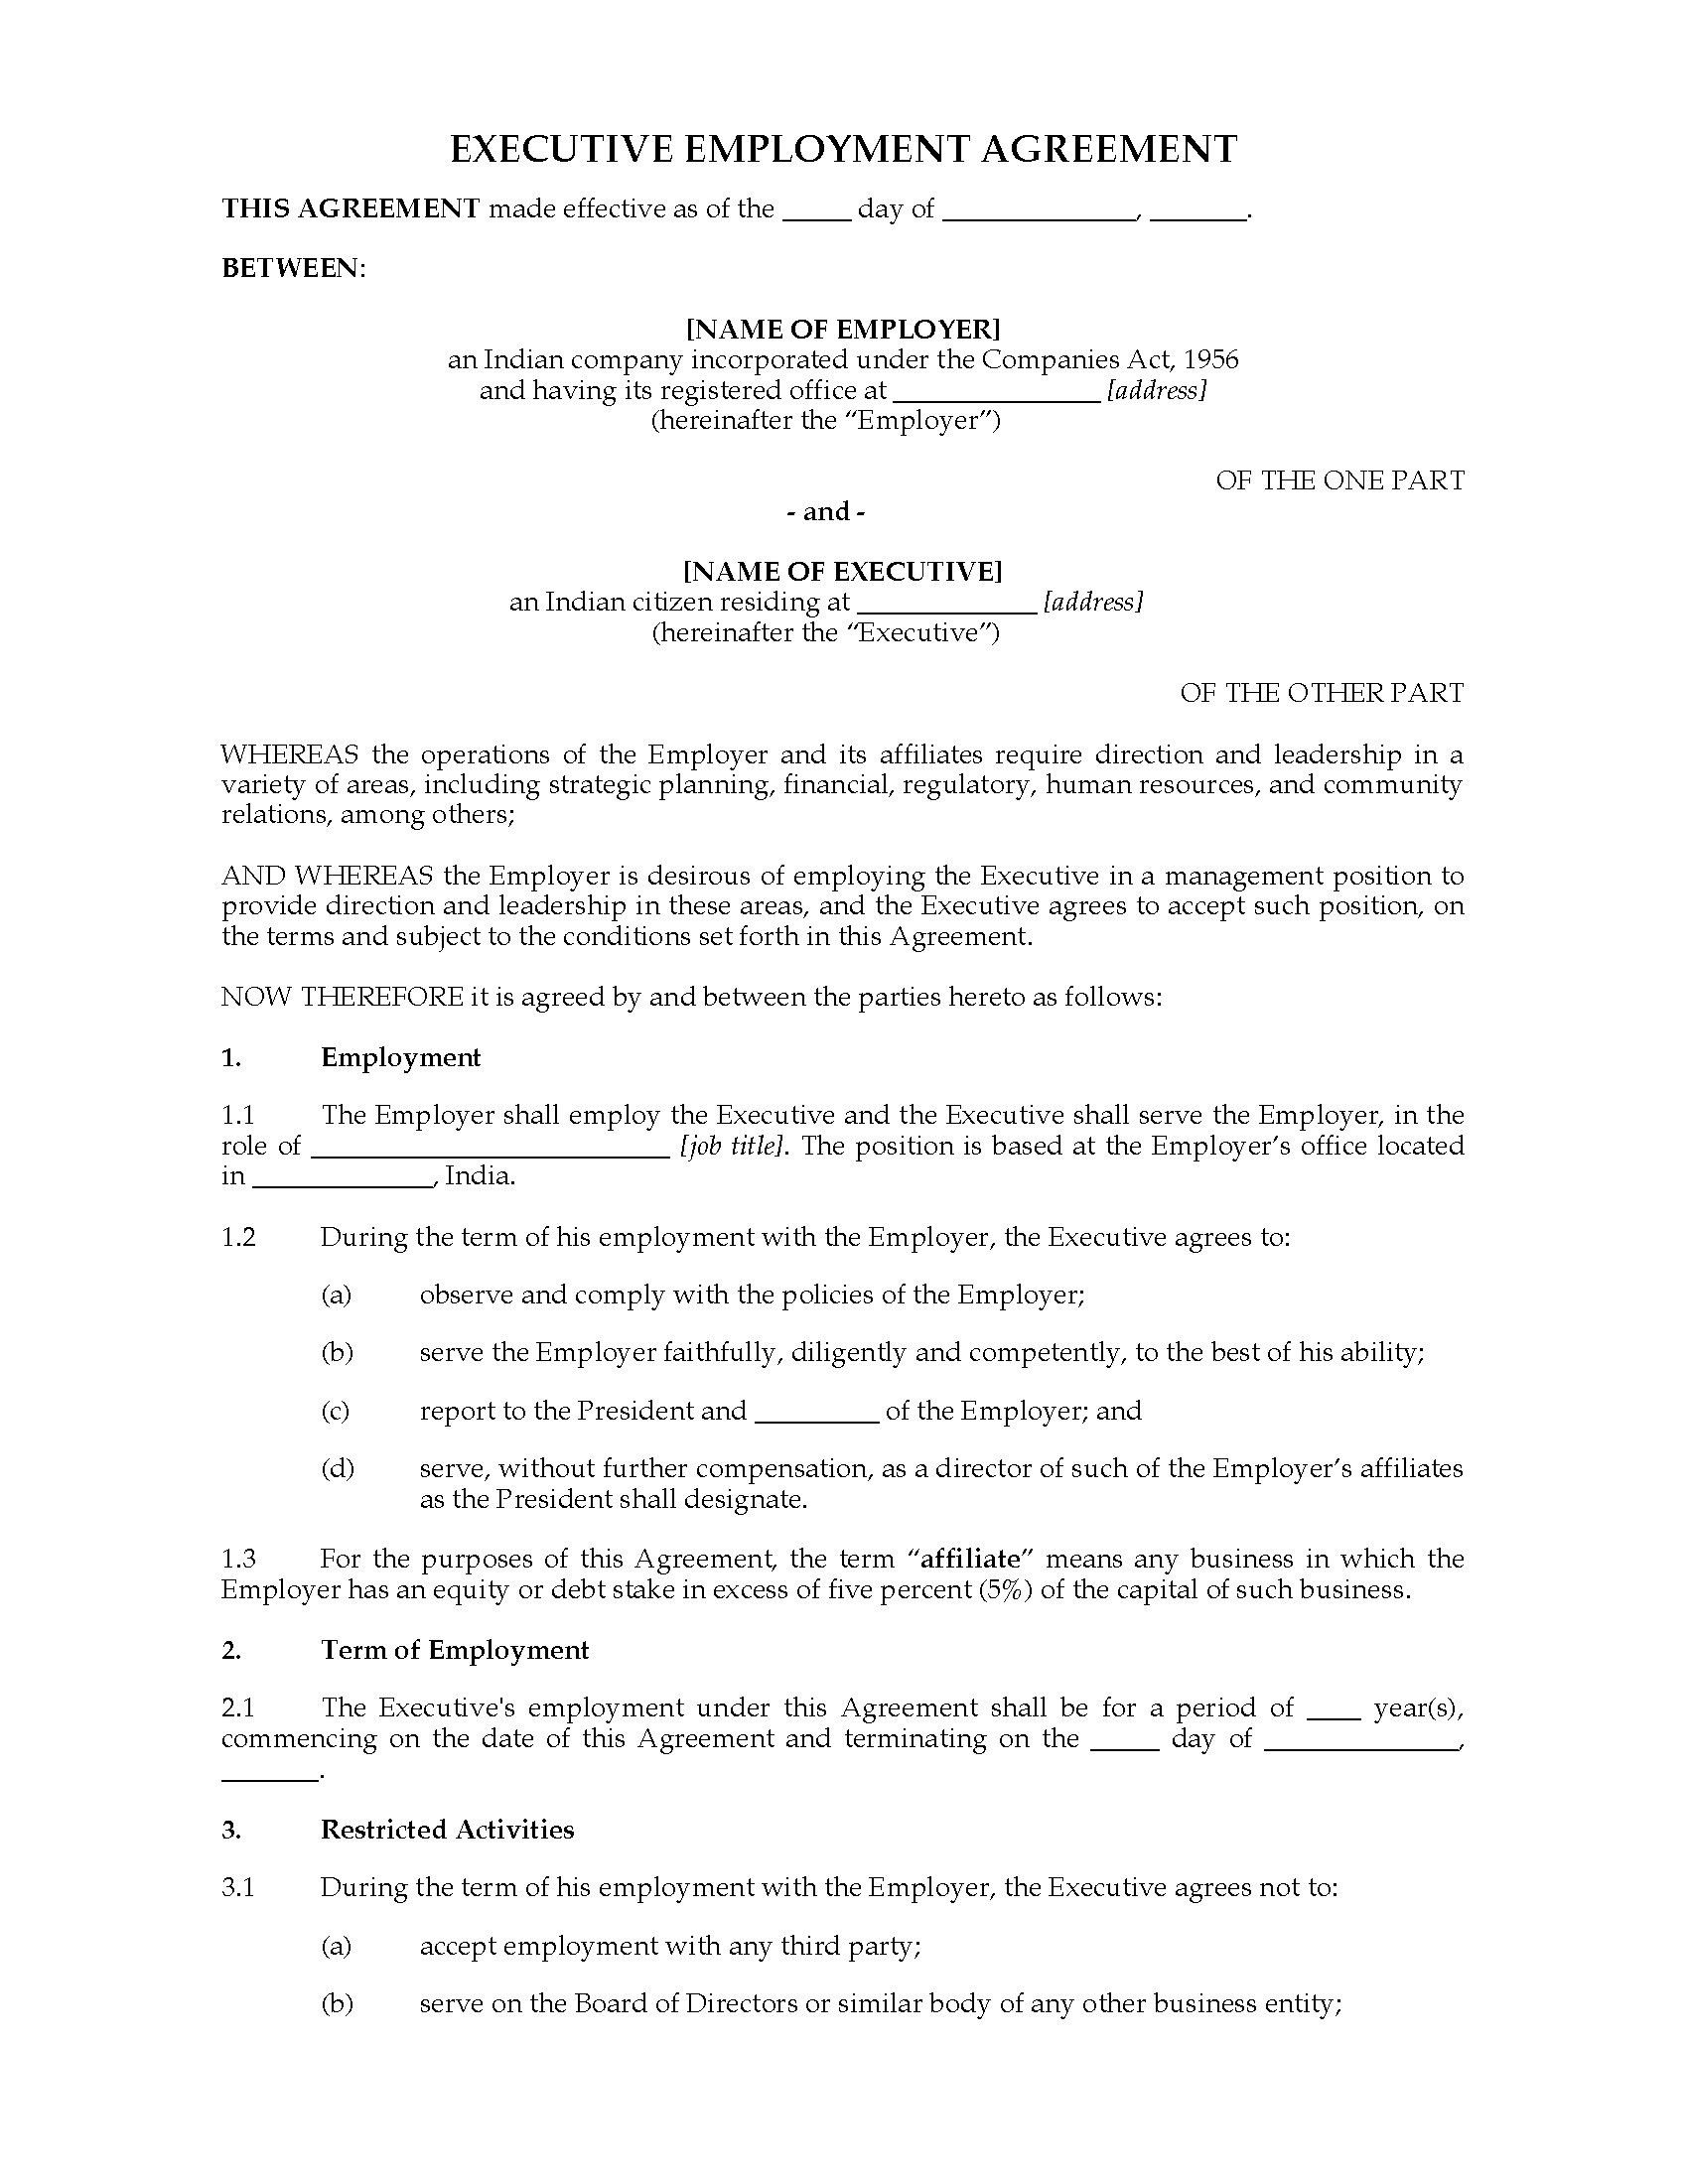 assignment agreement format india